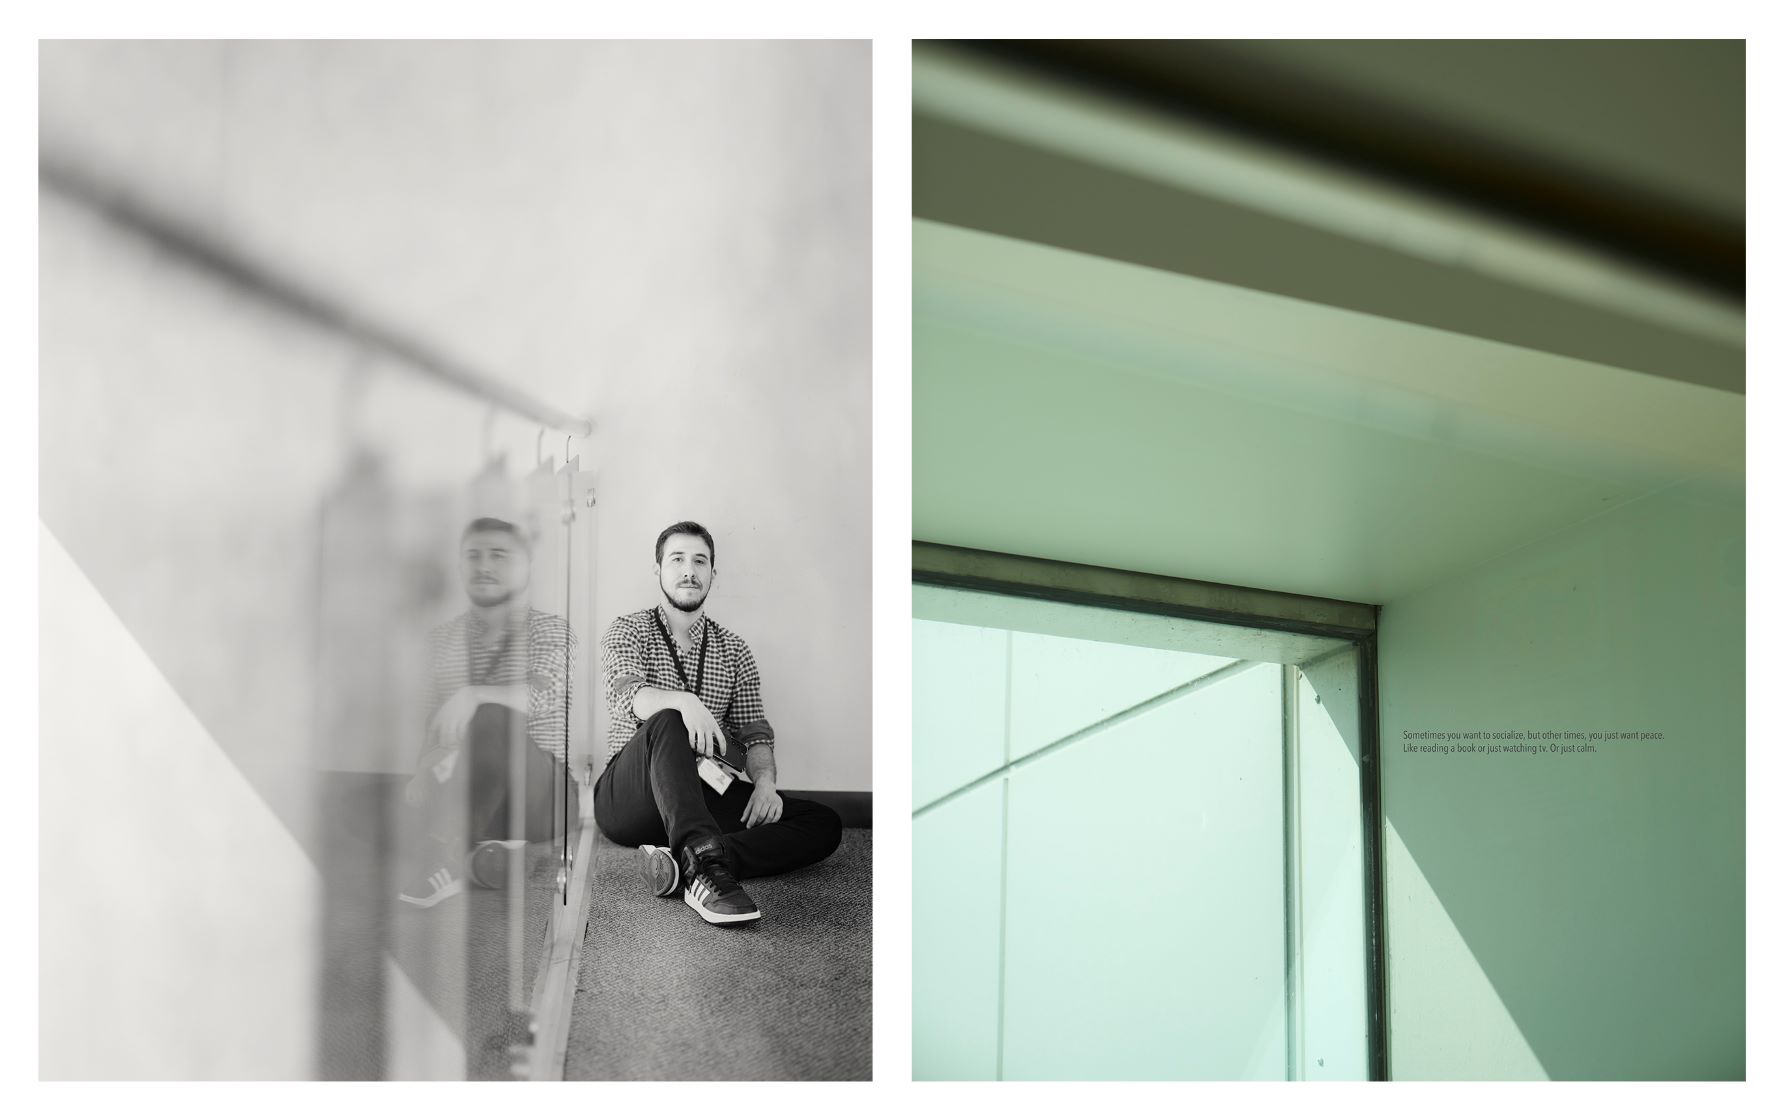 Diptych image of Adrian Velasquez and their haven